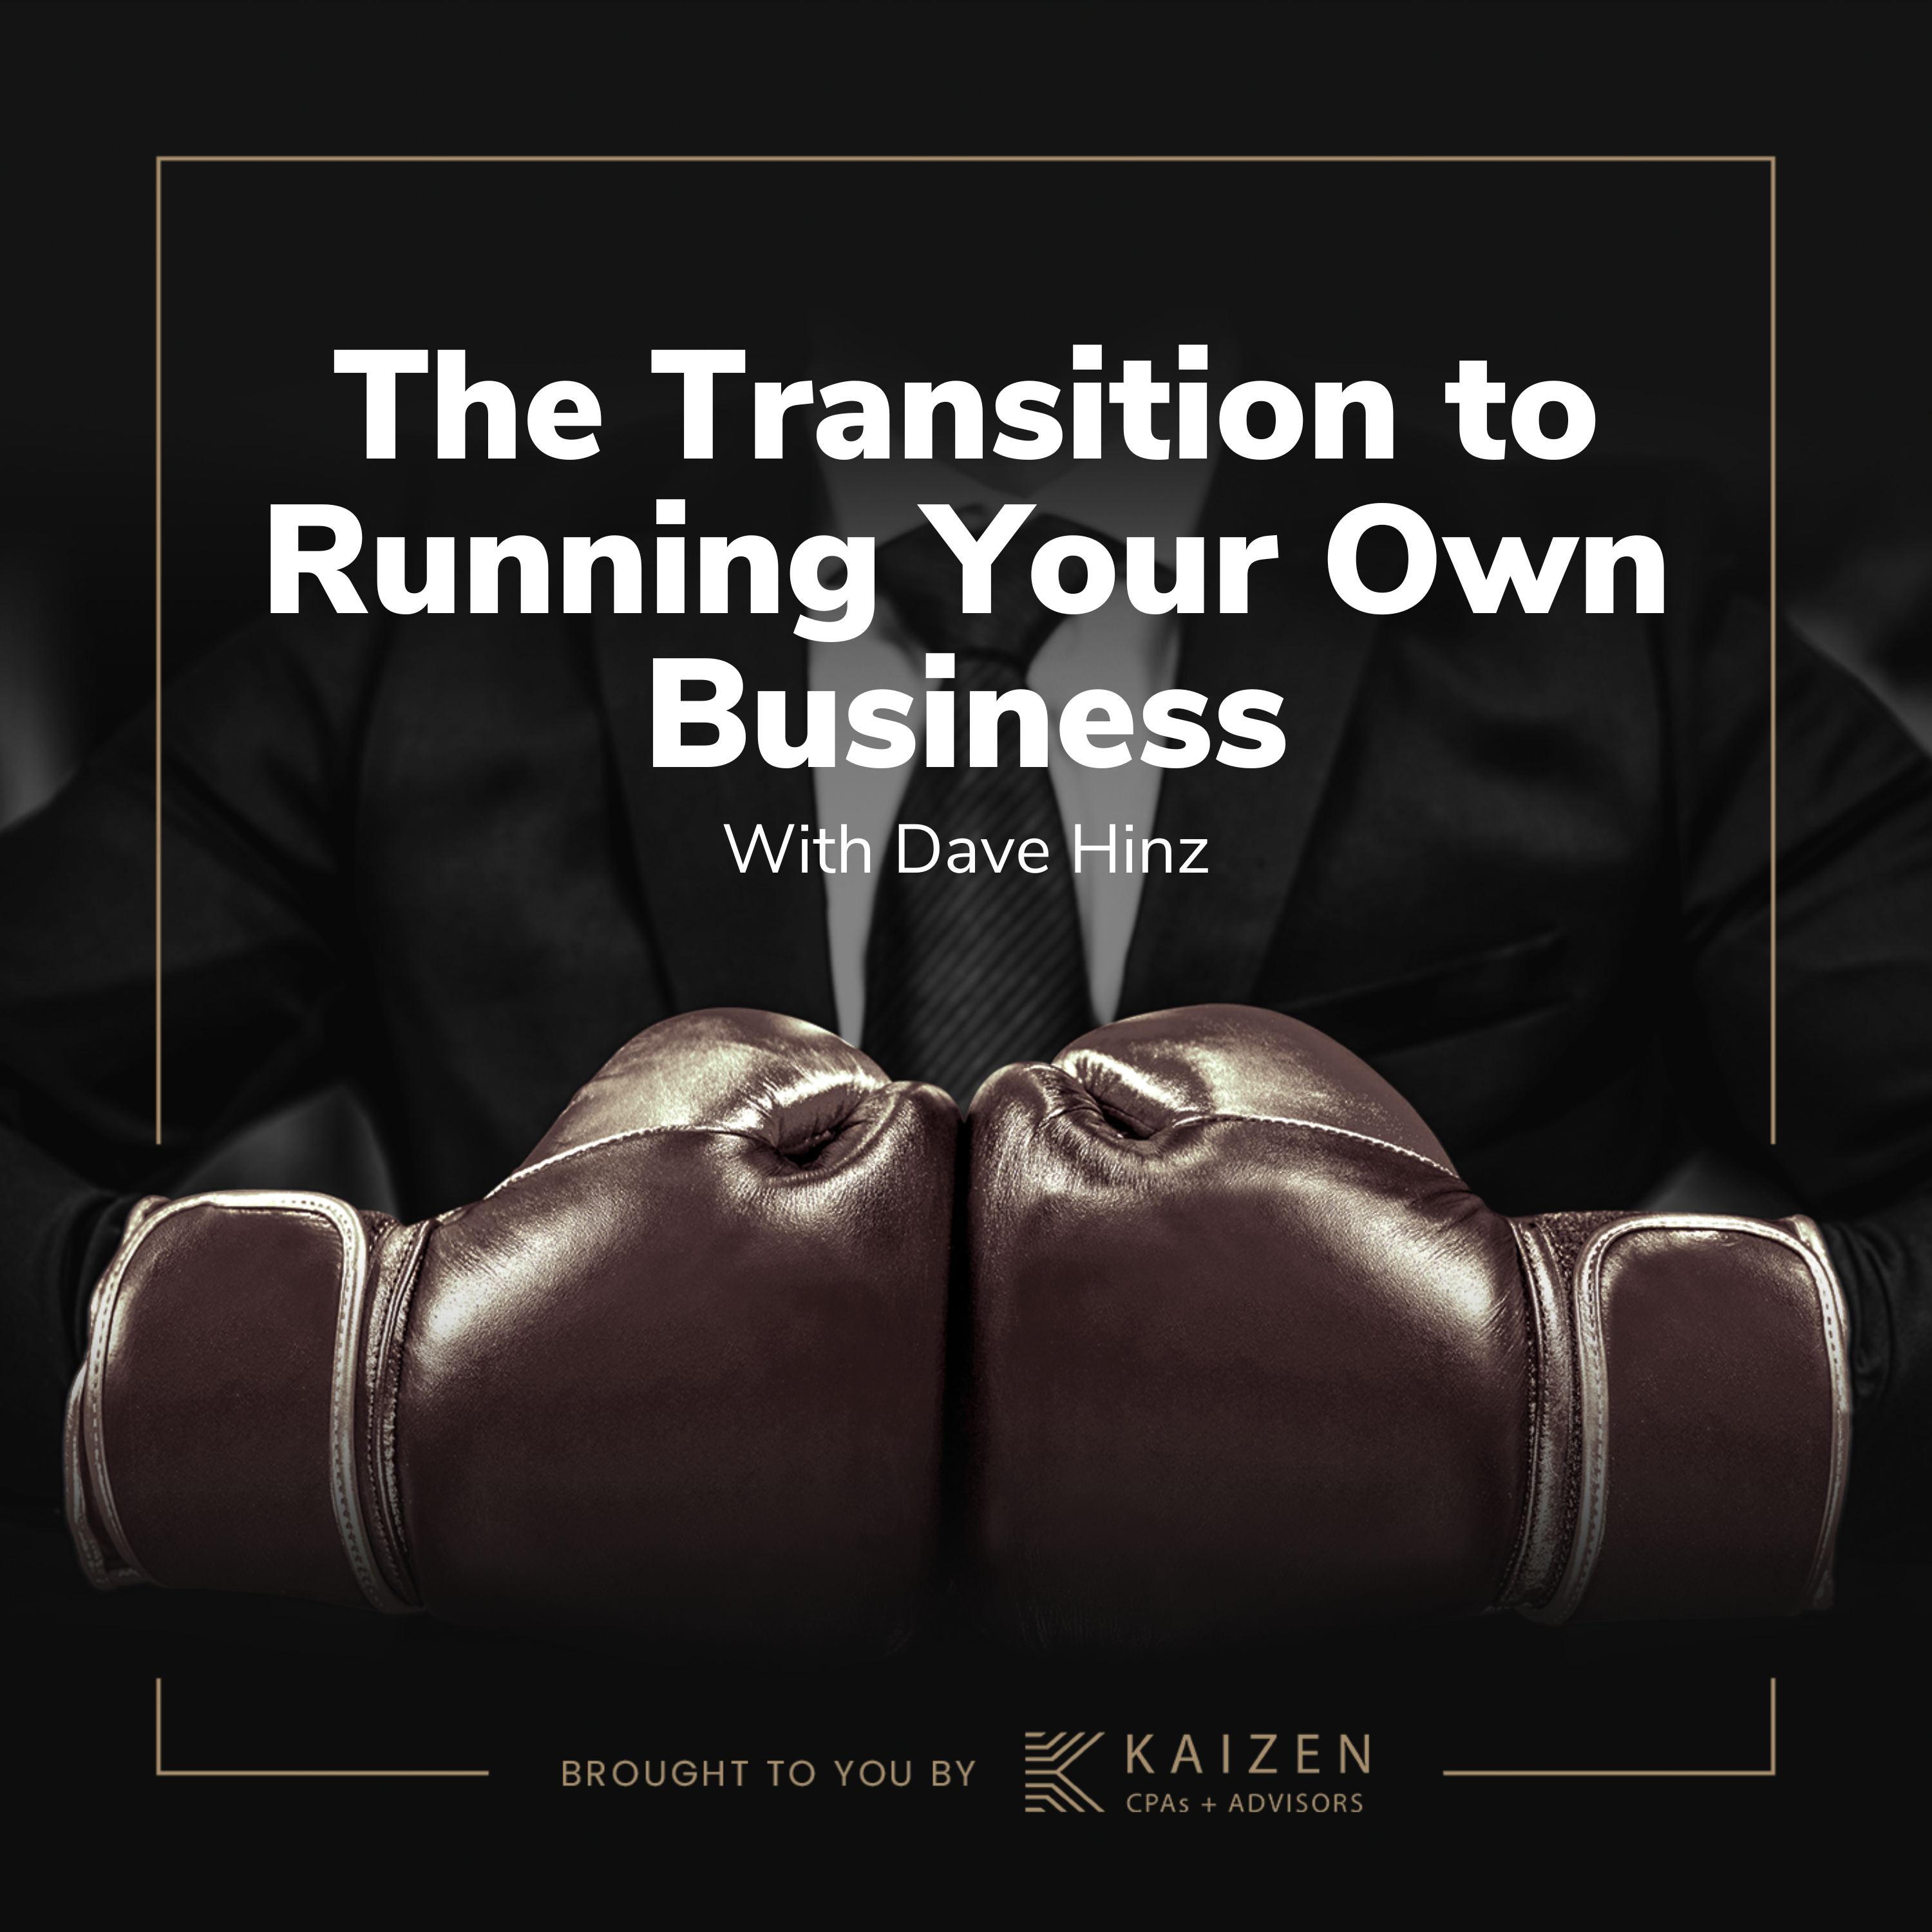 Transitioning to running your own business